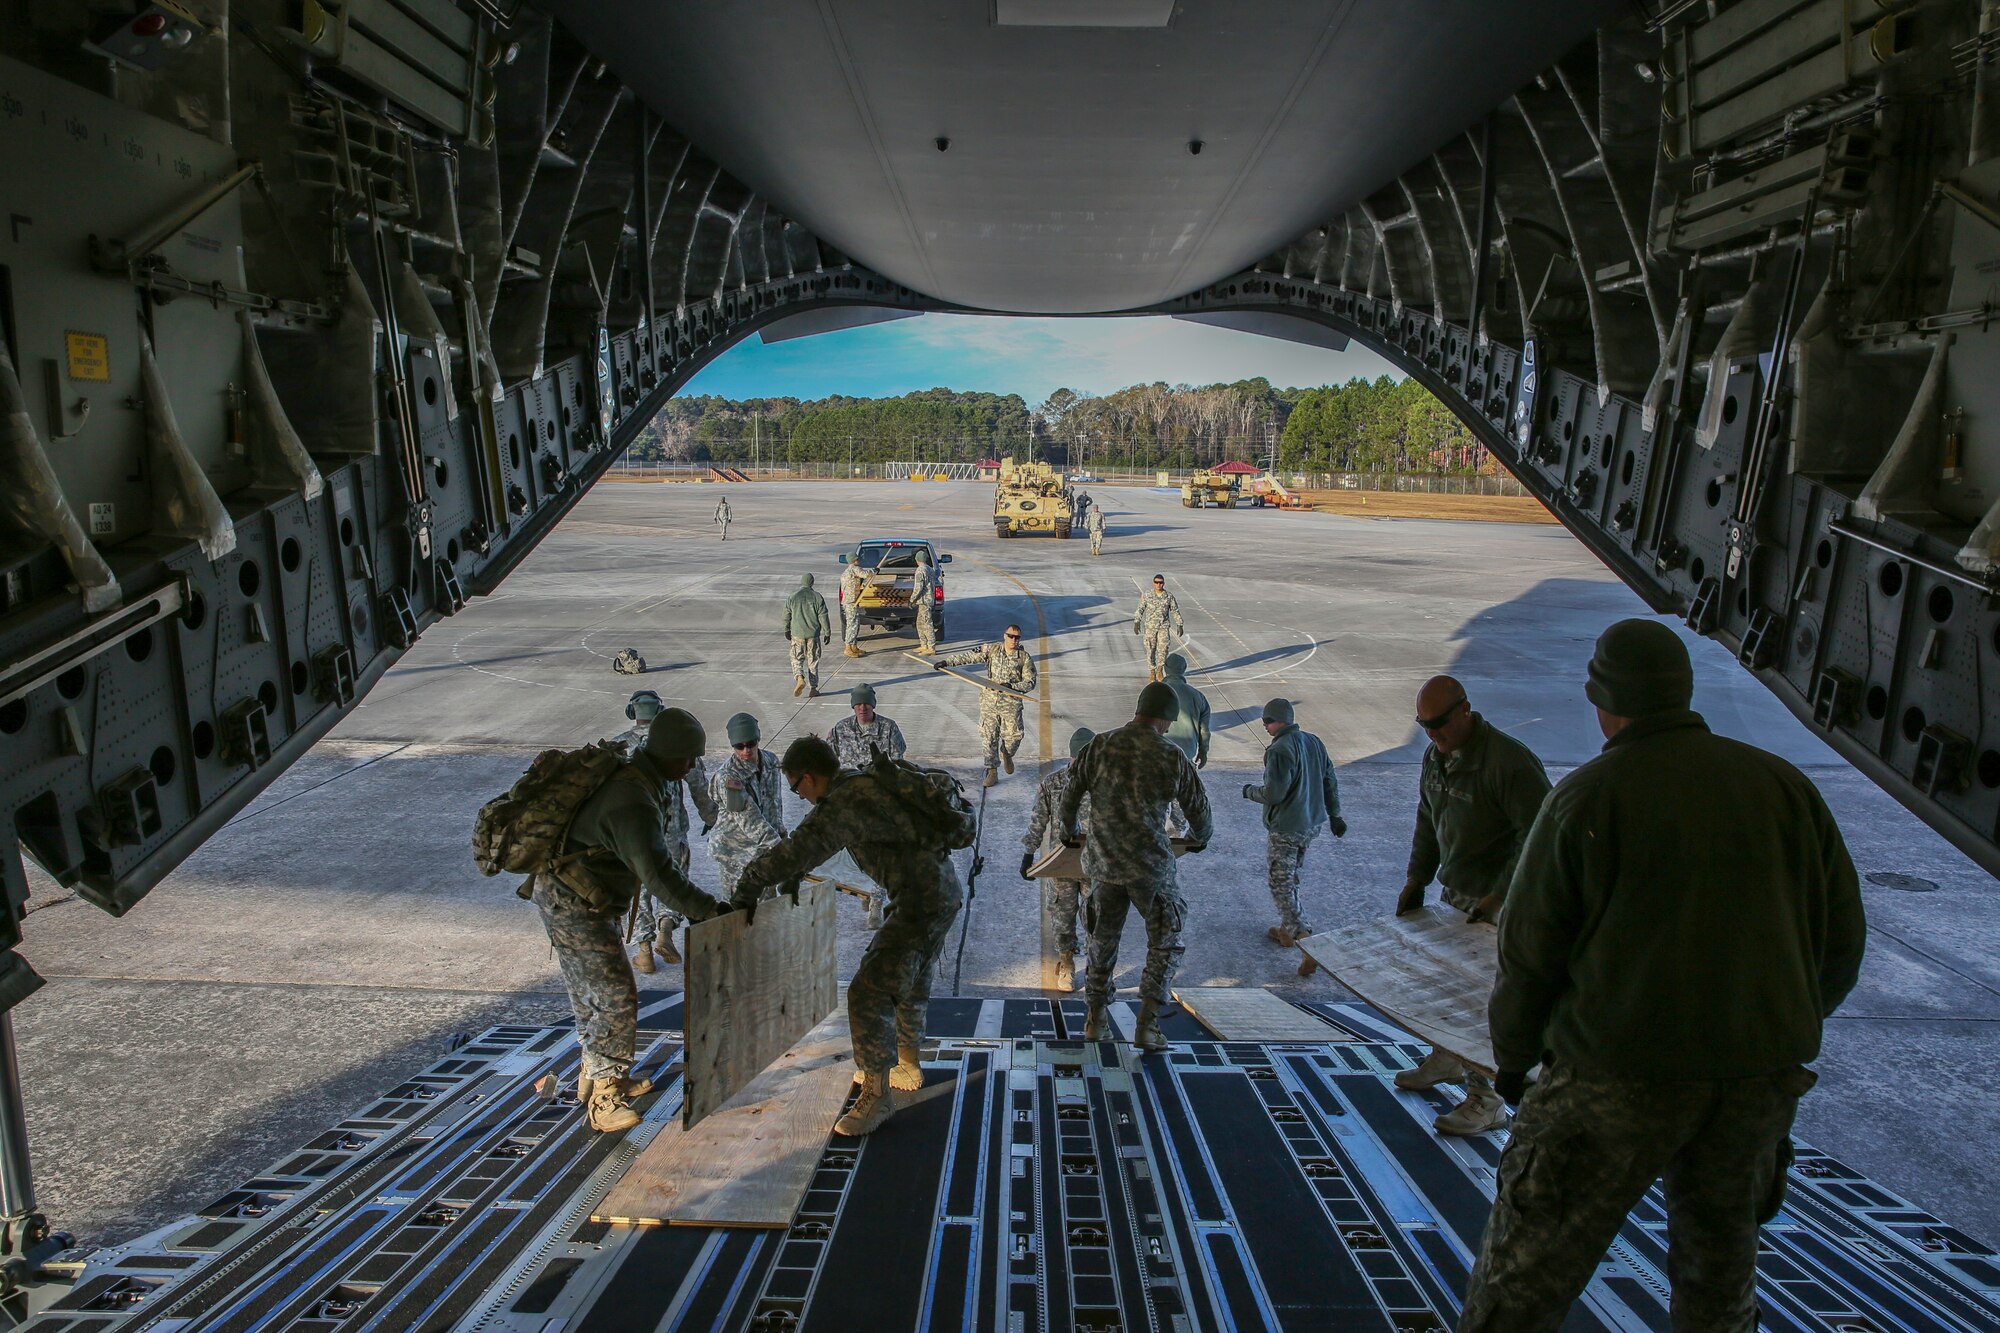 Soldiers from the U.S. Army’s 3rd Infantry Division stationed at Fort Stewart, Ga. lay plywood on the ramp of a C-17 Globemaster III Dec. 11, 2014 as they prepare to load two M2A3 Bradley Fighting Vehicles at Hunter Army Airfield, Ga. The mission was part of a two-day exercise which integrated C-17 air and ground crew training for 315th Airlift Wing Airmen stationed at Joint Base Charleston, S.C. as well as Soldiers from one of the 3rd Infantry Division’s Immediate Ready Companies who can deploy within 22 hours. Four C-17’s were used during the exercise to deploy and redeploy two Abrams M1A2 tanks, an M88 recovery vehicle and two M2A3 Bradley Fighting Vehicles. (U.S. Air Force photo by Tech. Sgt. Shane Ellis)